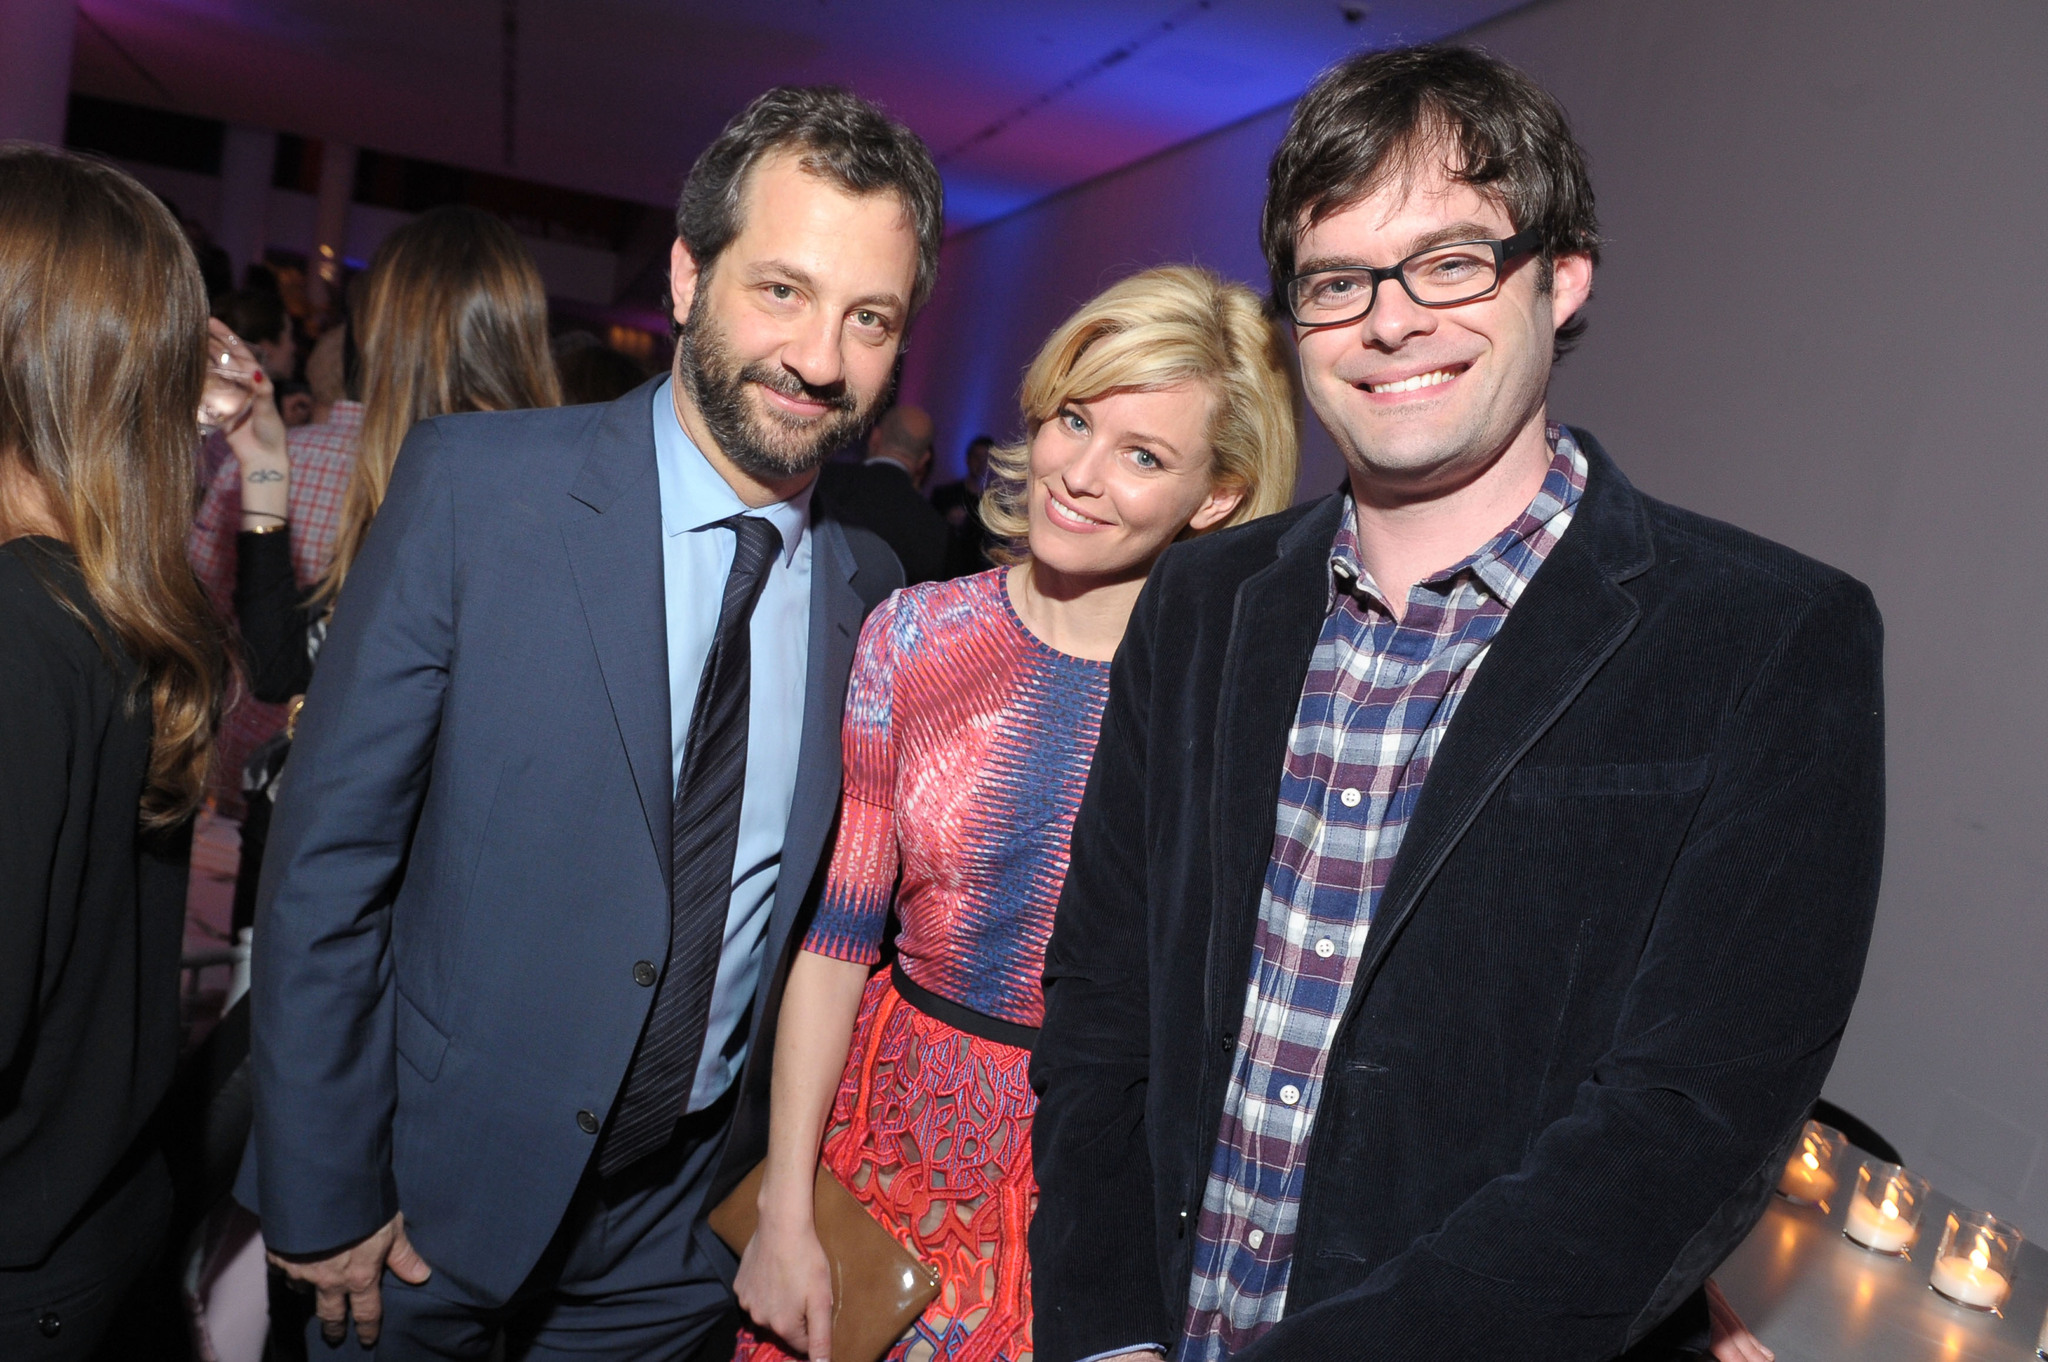 Elizabeth Banks, Judd Apatow and Bill Hader at event of Susizadeje penkerius metus (2012)